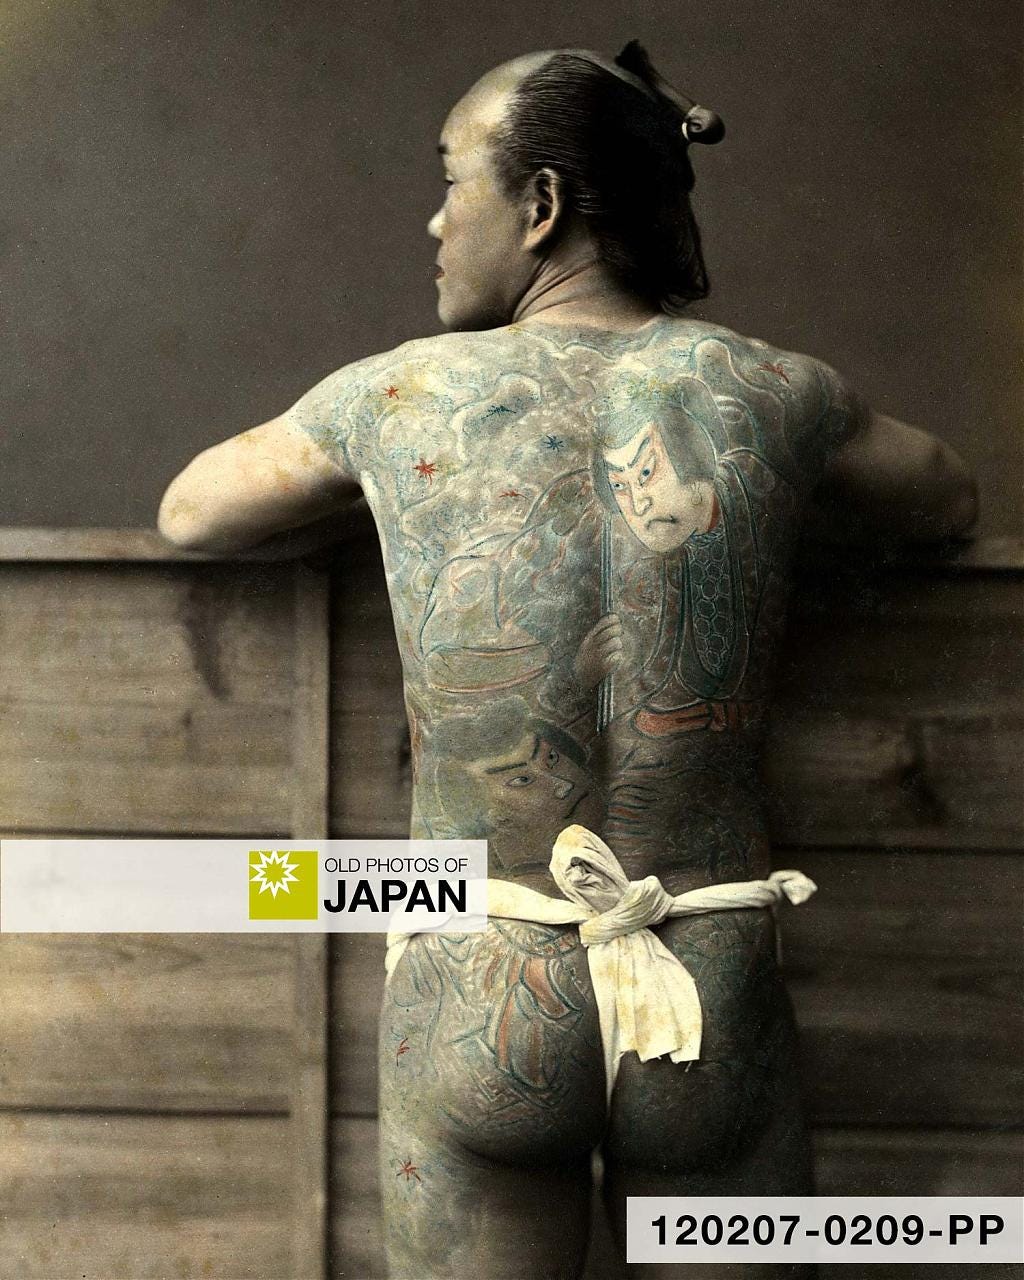 Albumen print by Japanese photographer Kimbei Kusakabe of a Japanese man with full-body tattoos wearing only a fundoshi (褌) loin cloth, 1890s